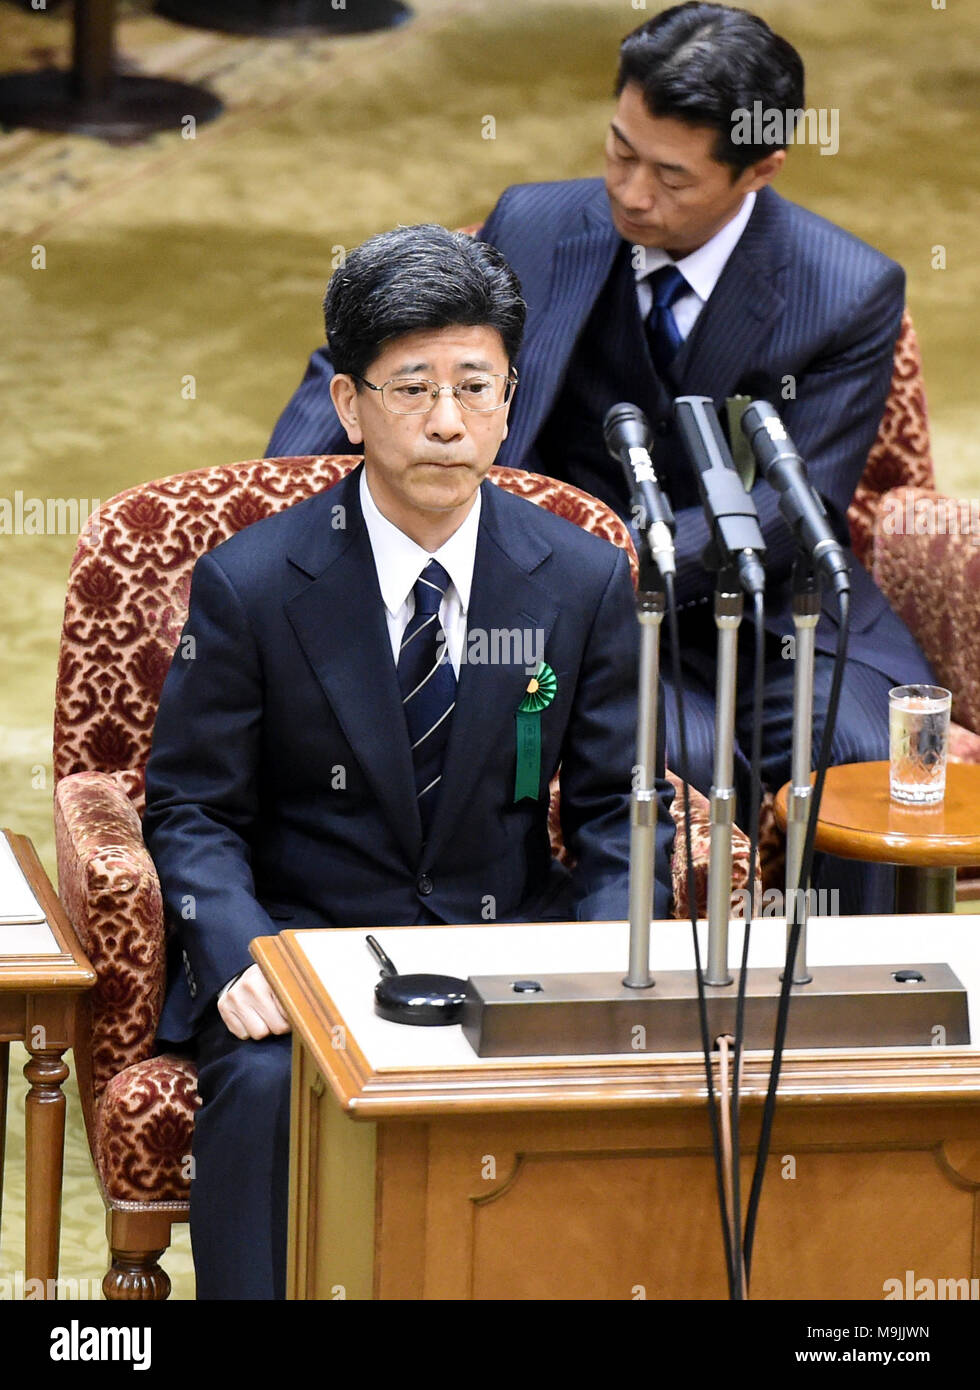 (180327) -- TOKYO, March 27, 2018 (Xinhua) -- Former head of the National Tax Agency Nobuhisa Sagawa (front) appears as a sworn witness in the Diet, Japan's bicameral legislature, in Tokyo, Japan, March 27, 2018. A key figure in a document-tampering scandal involving Japan's Finance Ministry appeared in the Diet on Tuesday to give sworn testimony over the falsification of government documents related to the heavily discounted sale of state land to a nationalist school operator. Former national tax agency head Nobuhisa Sagawa, who was previously in charge of taking care of the land sale, steppe Stock Photo